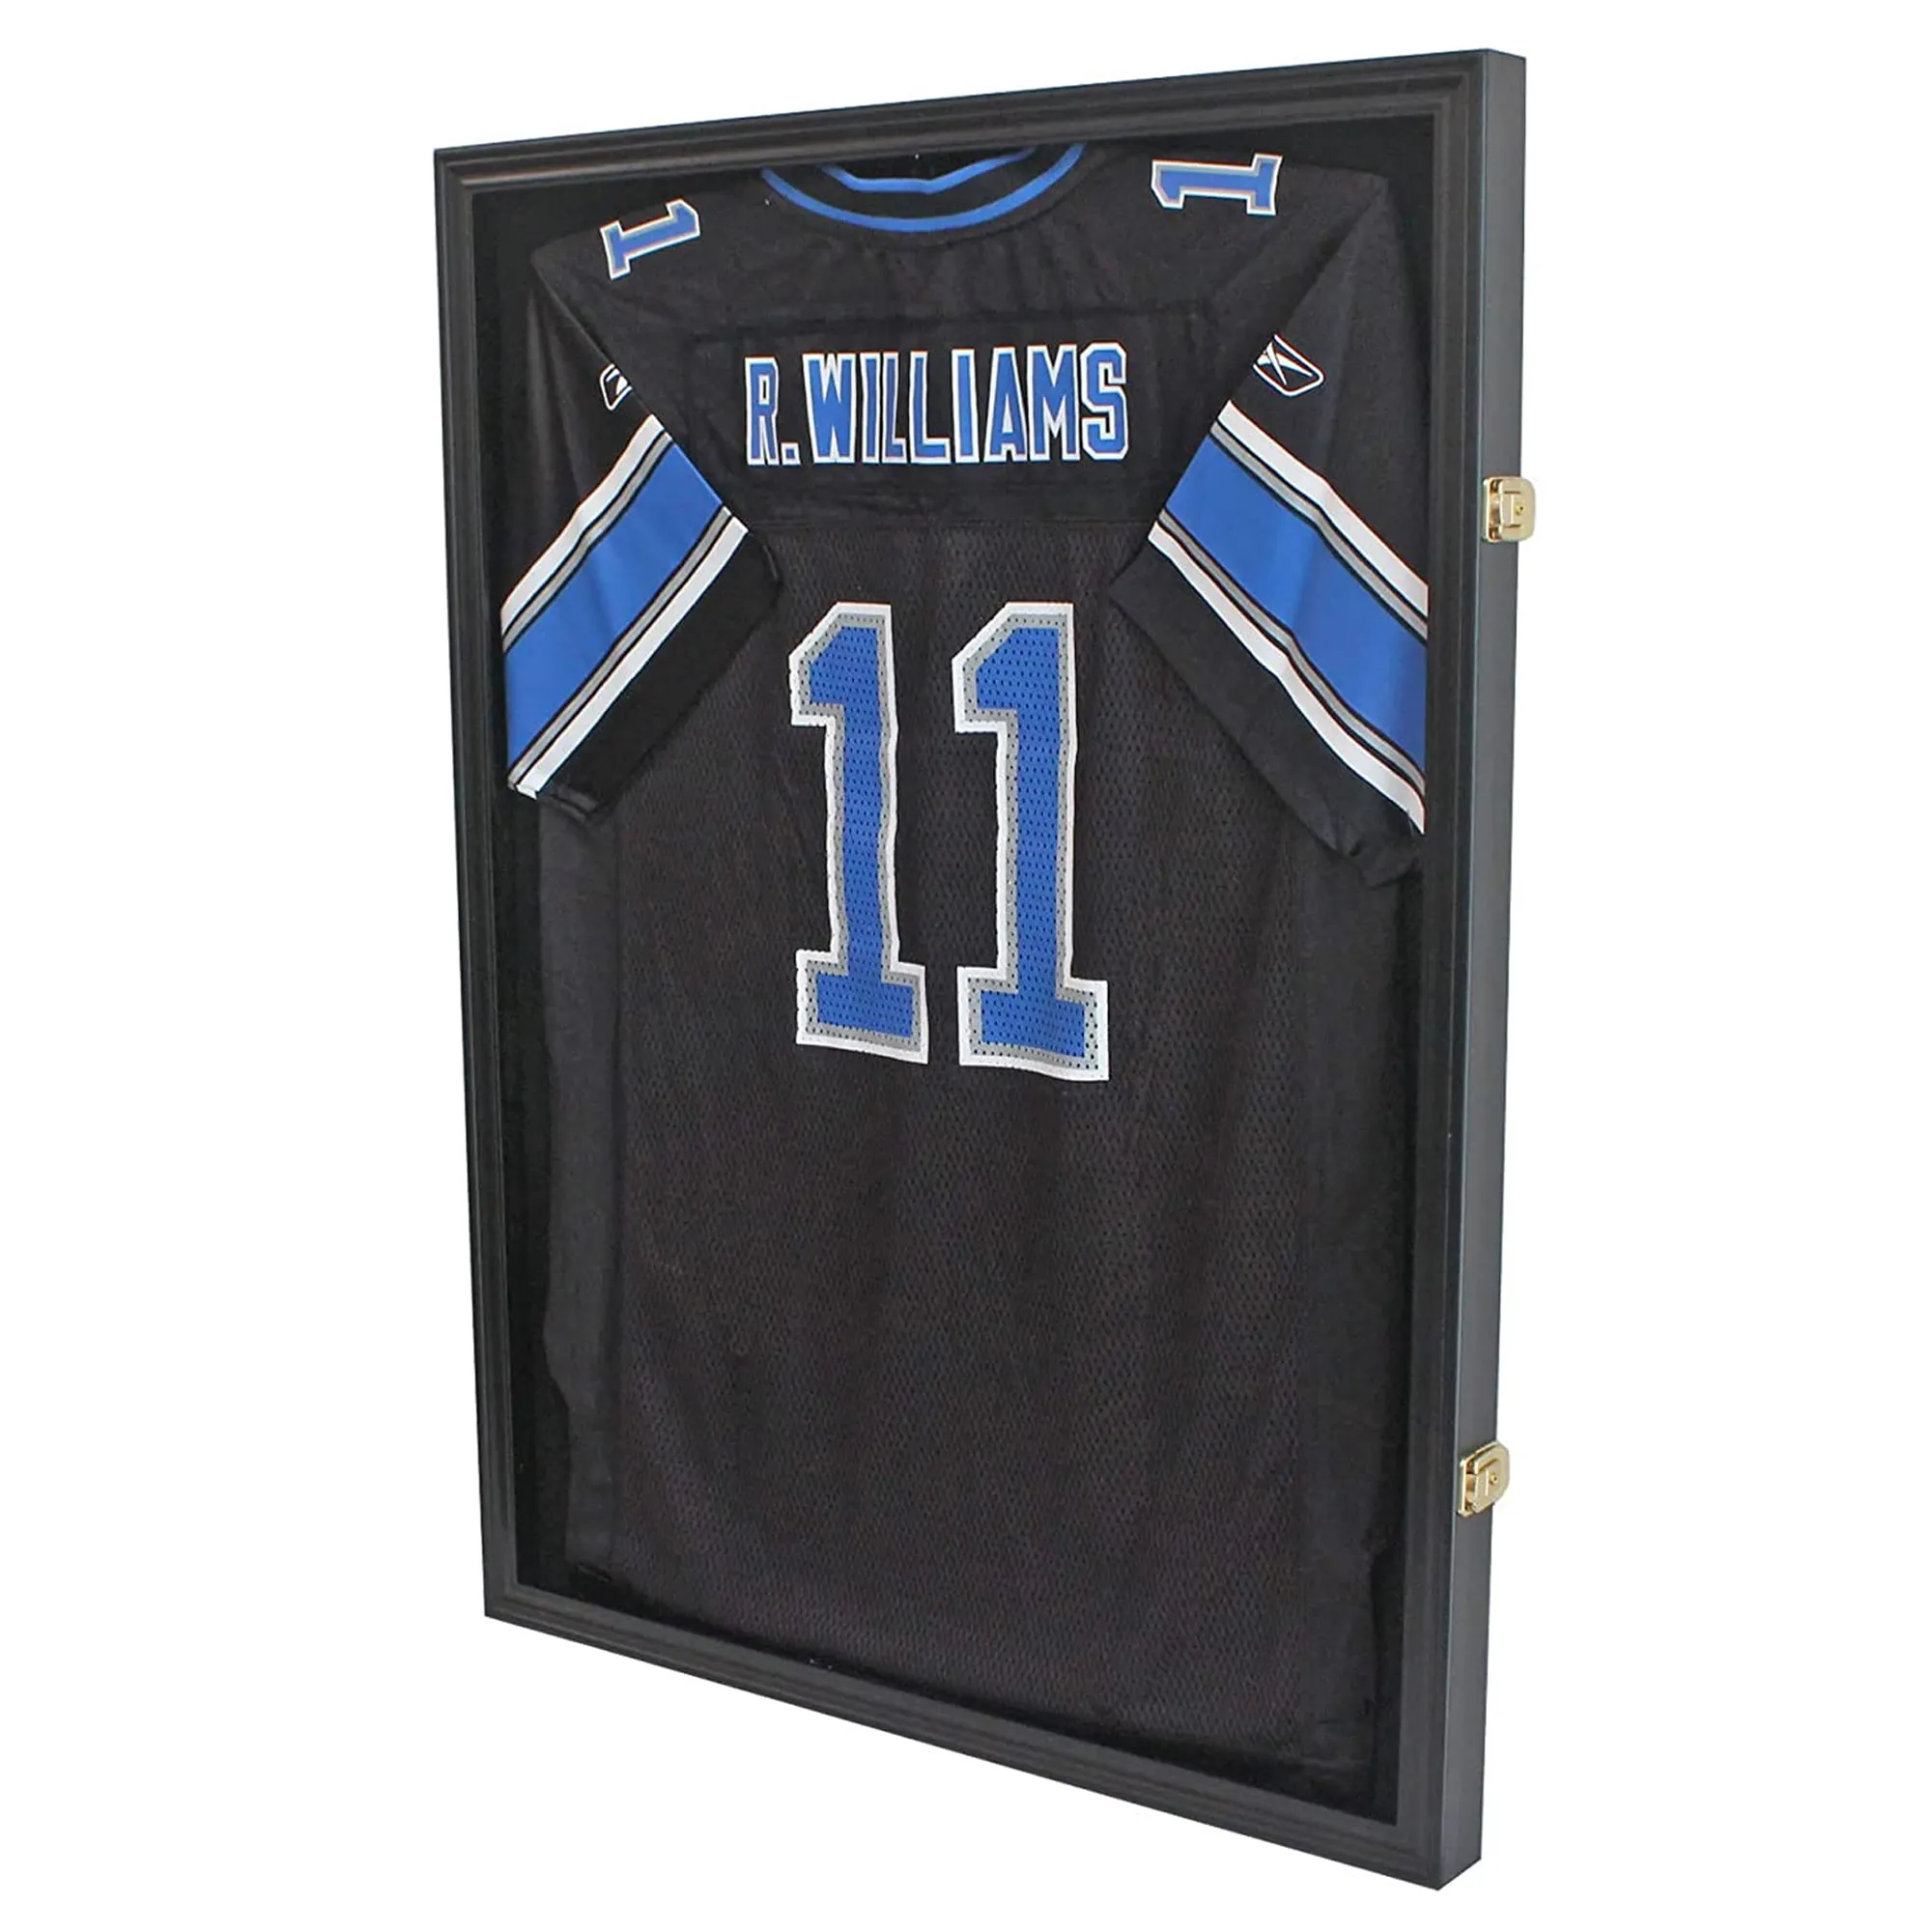 Jersey Display Frame Case Large Sport Jersey Shadow Box with Acrylic and Hanger for Basketball Football Shirt and Uniform